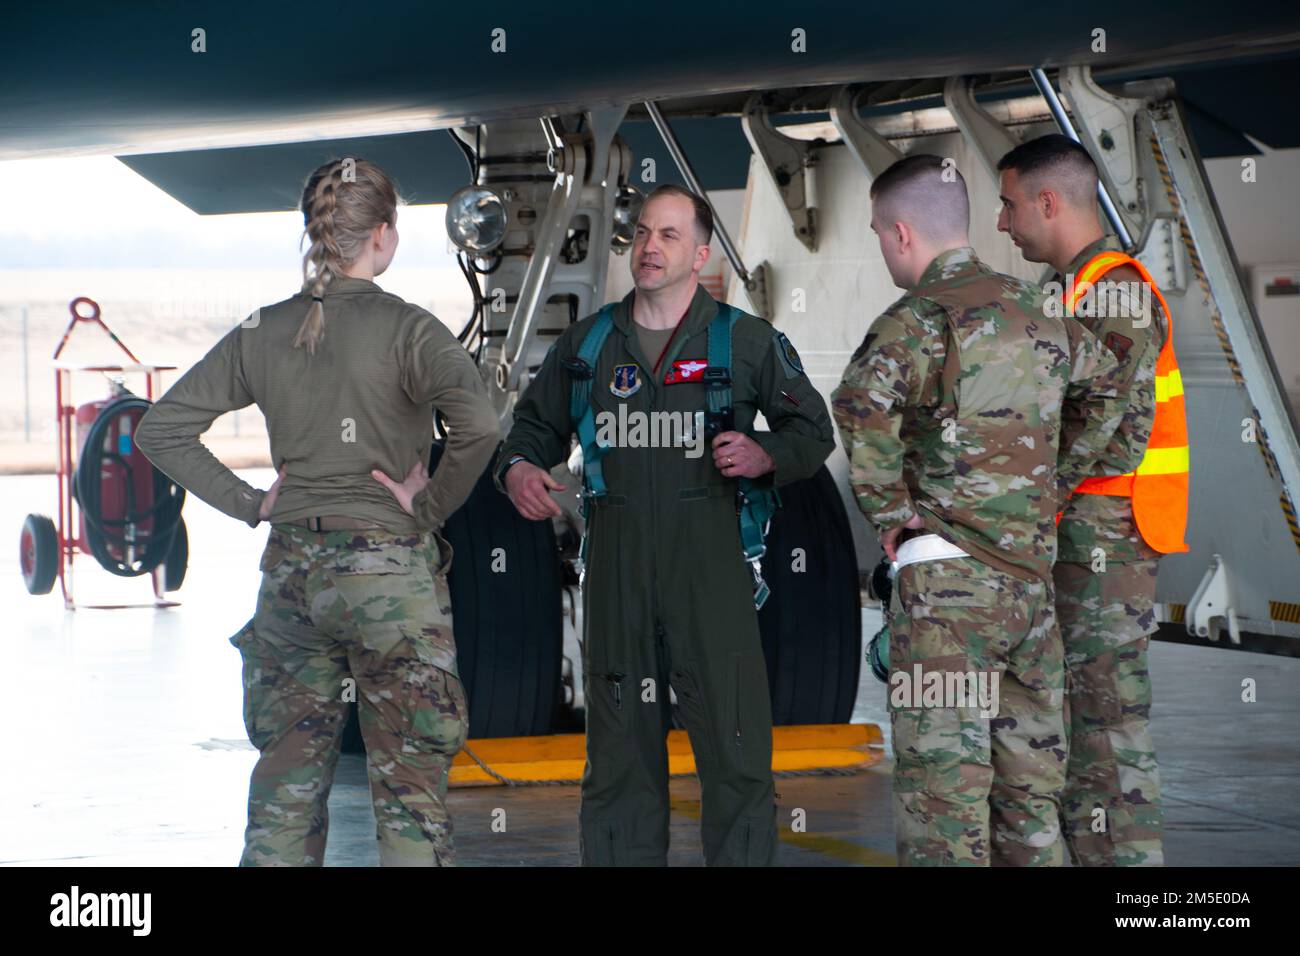 Lt. Col. Timothy Sullivan, 131st Bomb Wing pilot, talks with his crew chiefs in front of the B-2 Spirit stealth bomber March 5, 2022, at Whiteman Air Force Base, Missouri. Sullivan flew his final B-2 flight in which he also surpassed 1500 hours in the B-2. Stock Photo